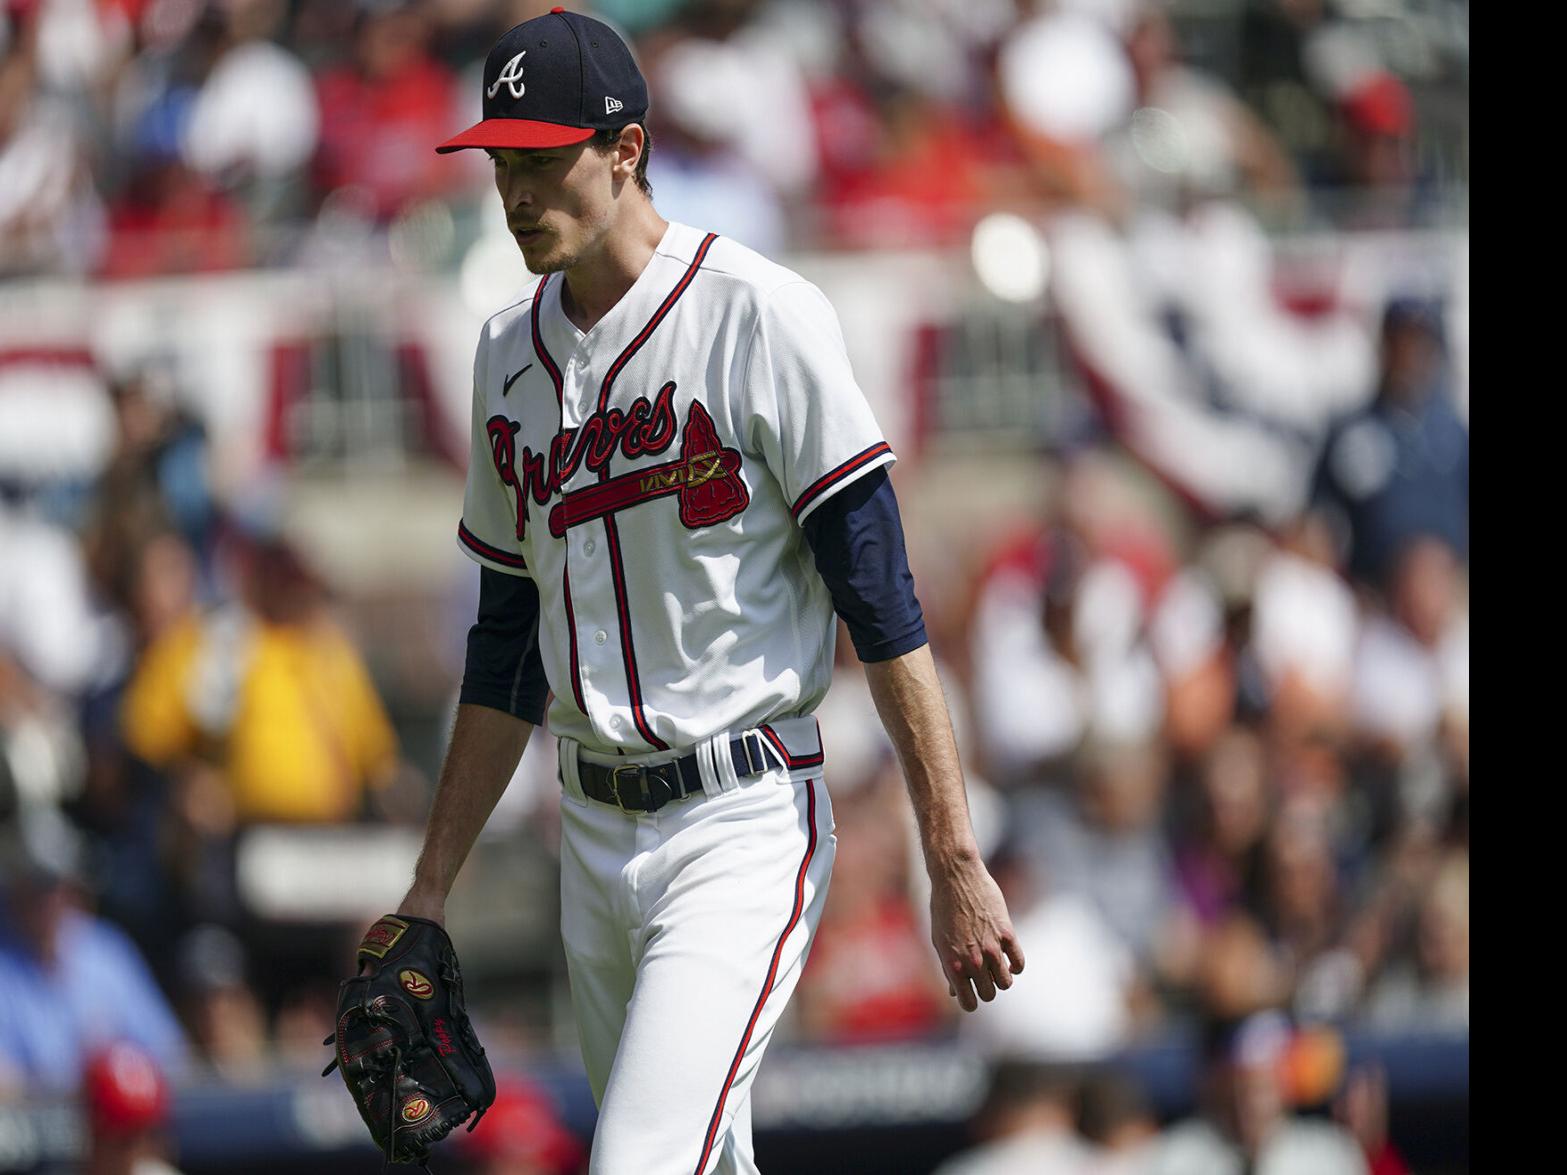 Grissom's demotion the right move for Braves?, Columns